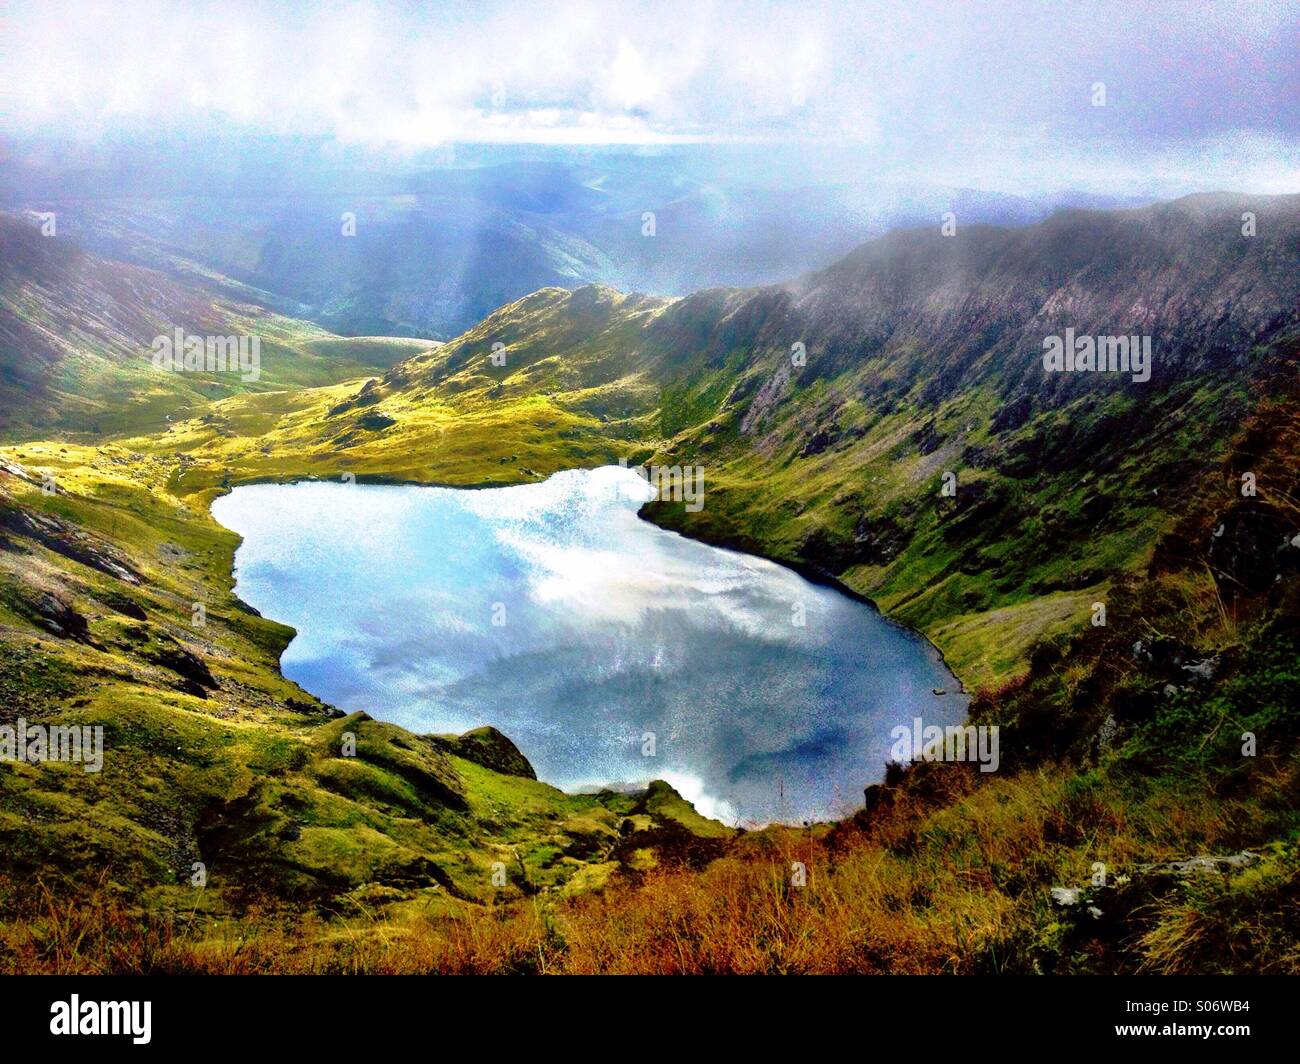 Llyn Cau seen on the way up Cadair Idris. Clouds reflected in the lake. Stock Photo